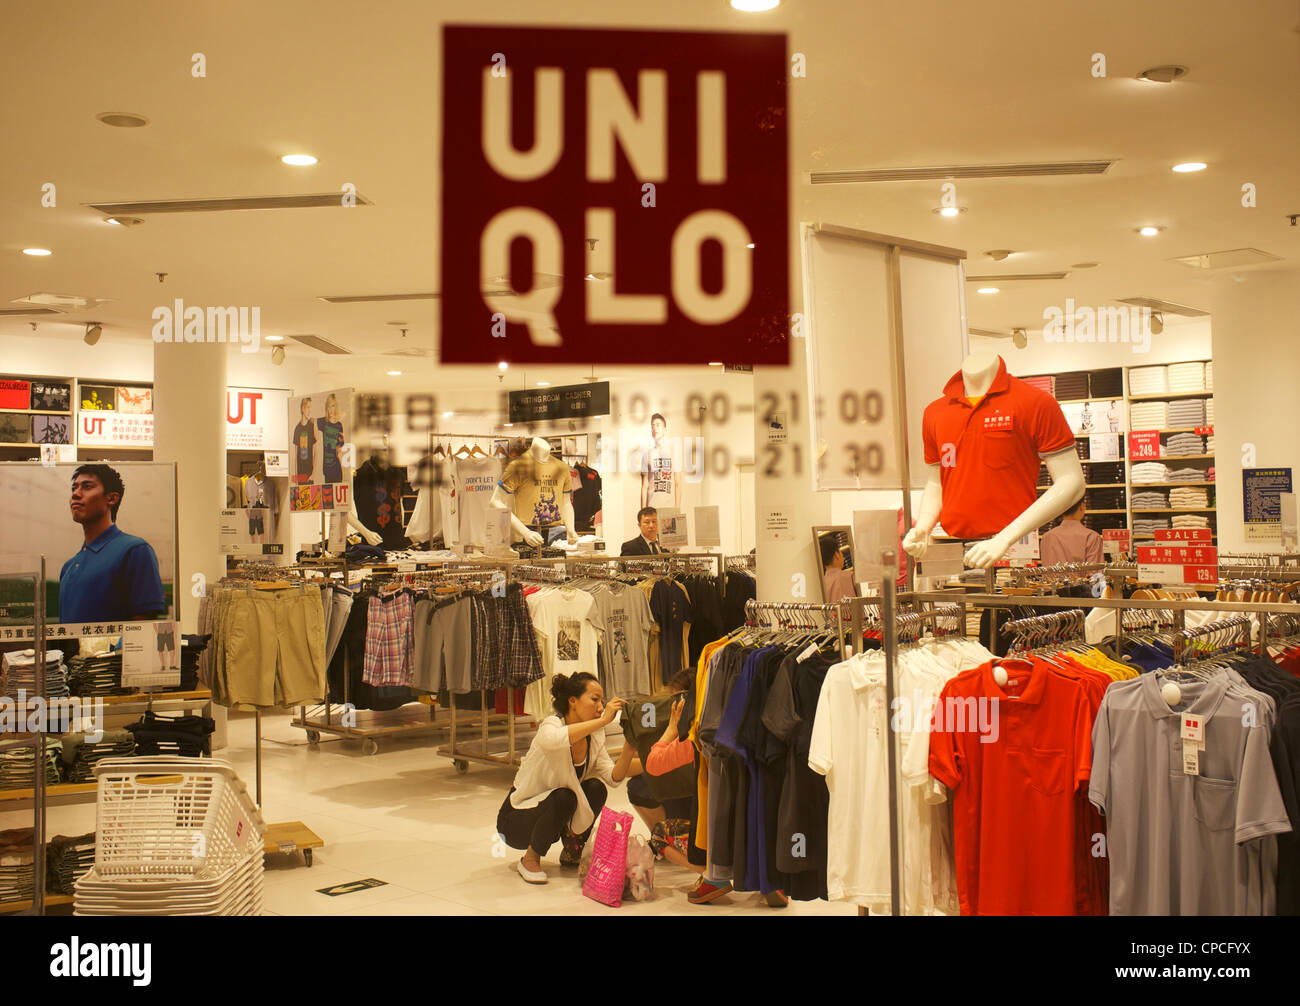 UNIQLO store in Tianjin, China. 14-May-2012 Stock Photo - Alamy